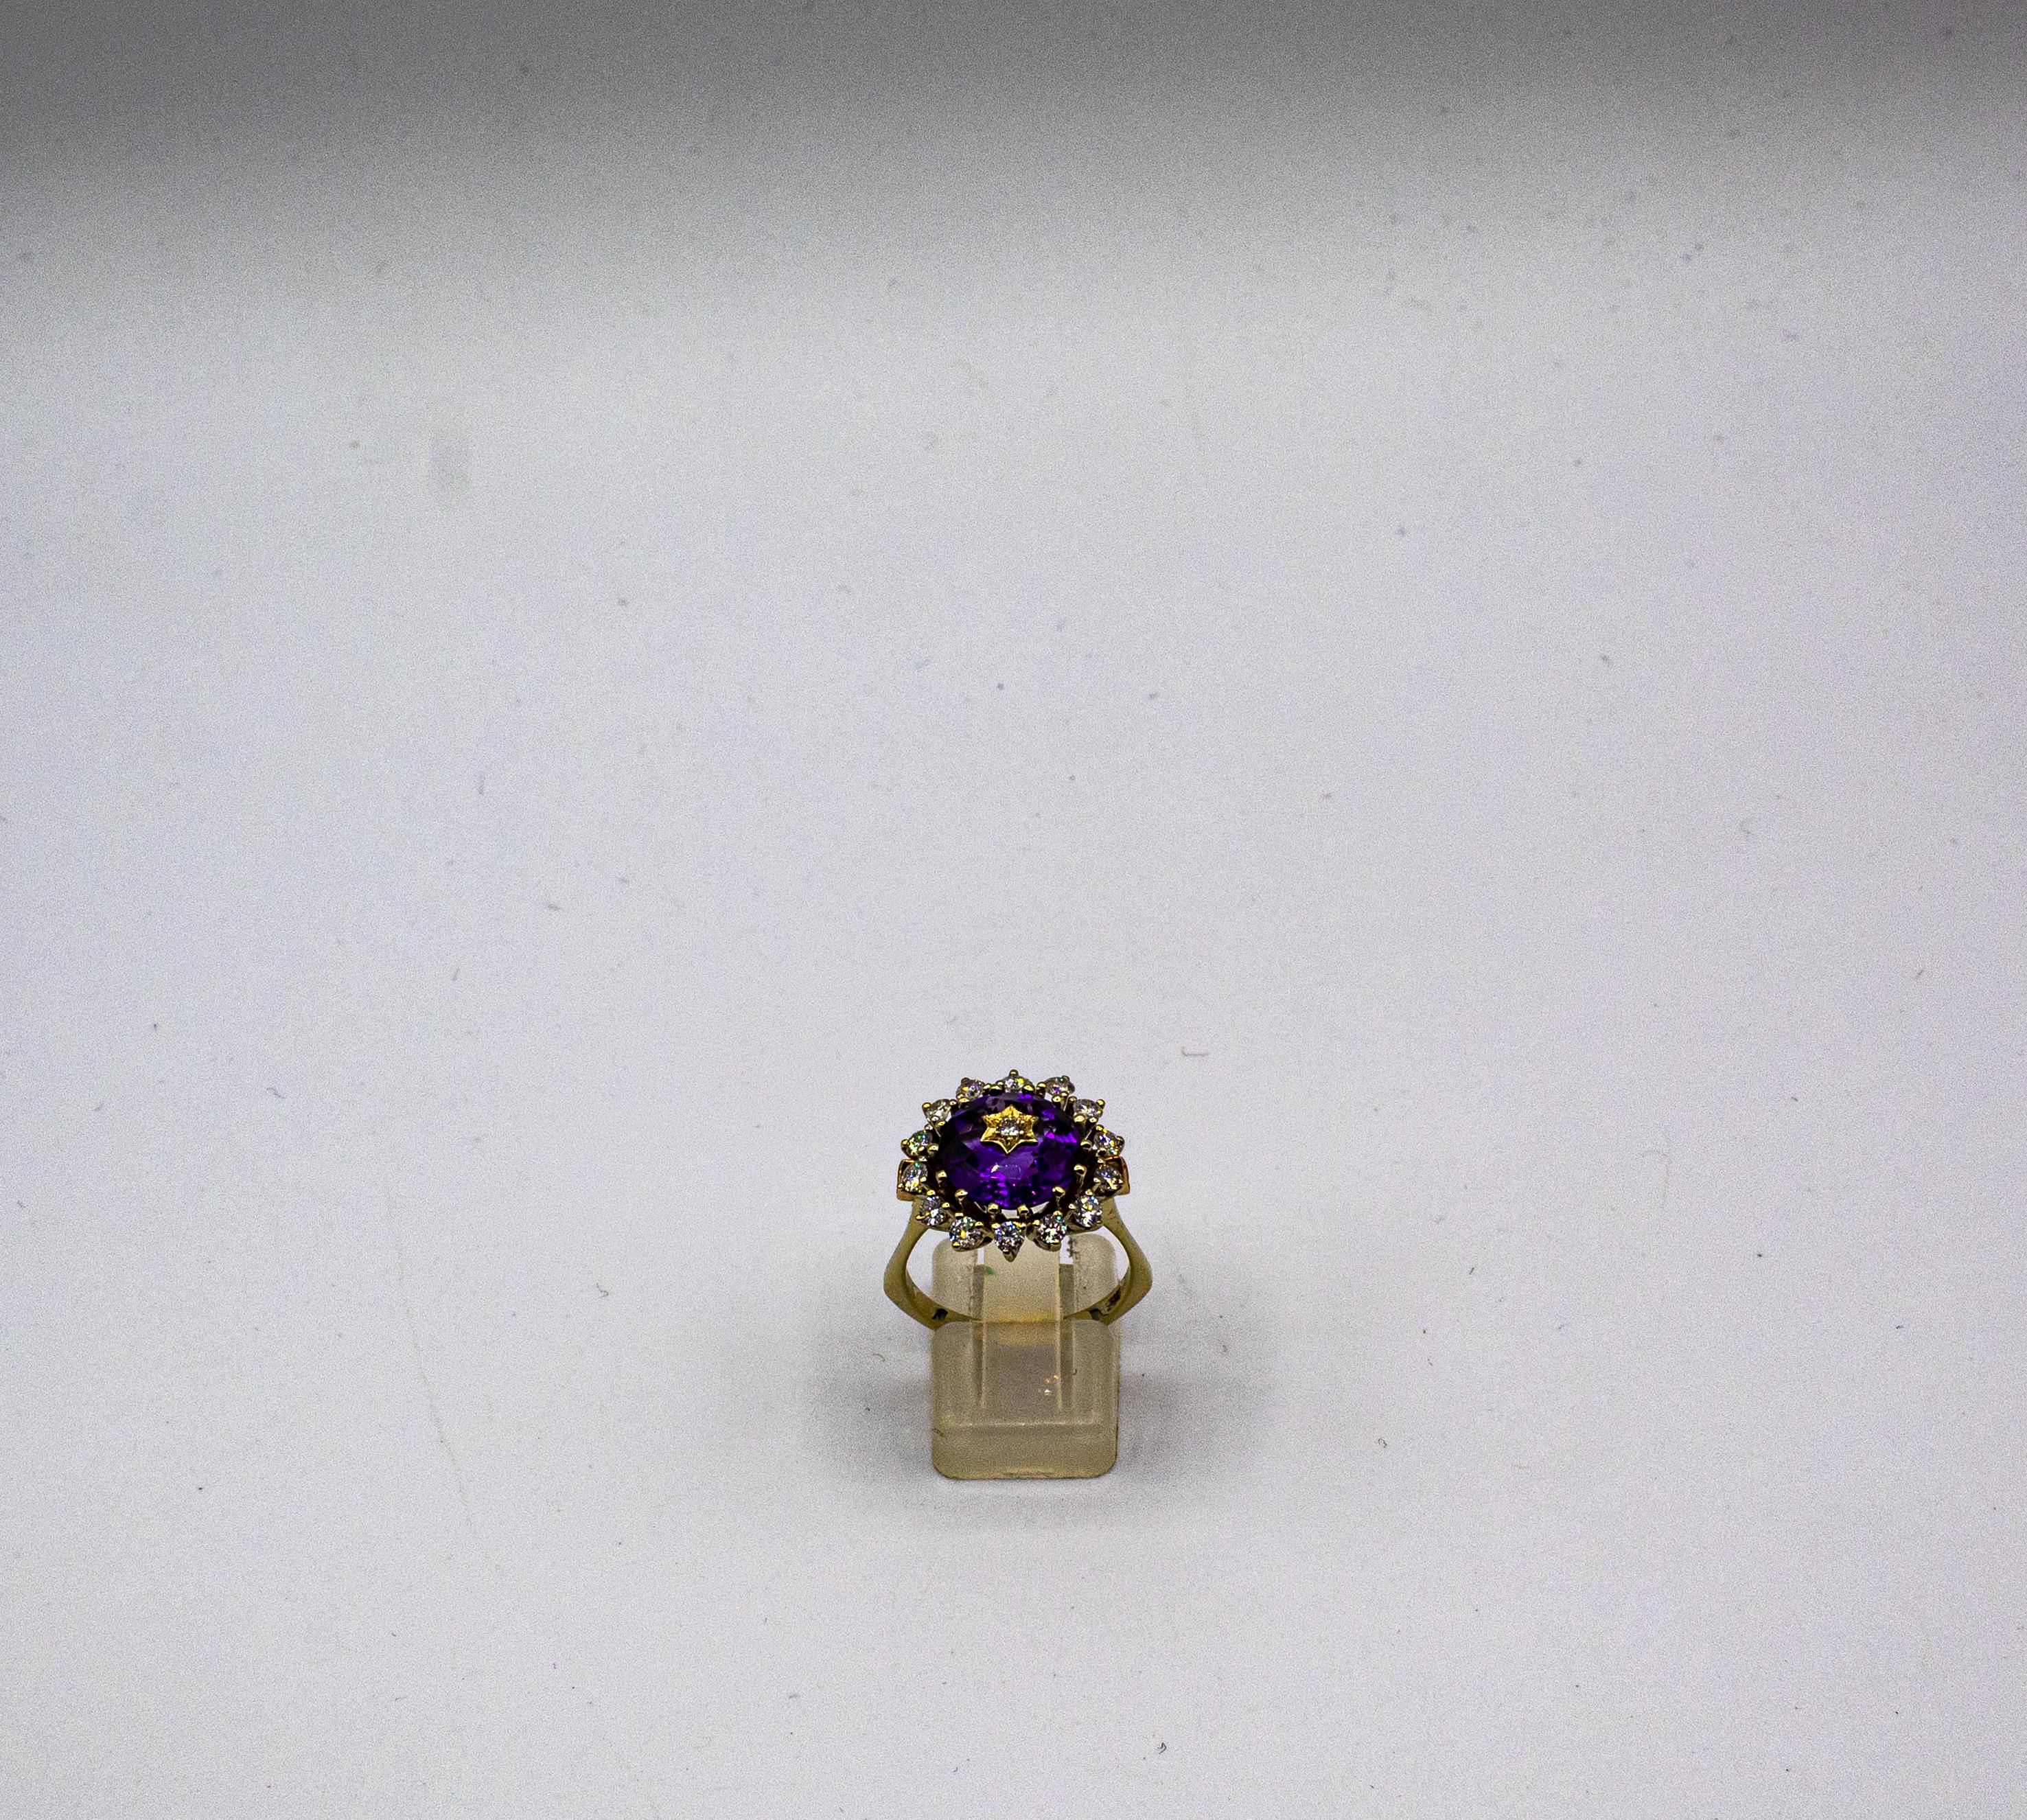 This Ring is made of 14K Yellow Gold.
This Ring has 0.96 Carats of White Brilliant Cut Diamonds.
This Ring has a 7.50 Carats Amethyst.
This Ring is inspired by Art Deco.

Size ITA: 16 USA: 7 1/2

We're a workshop so every piece is handmade,